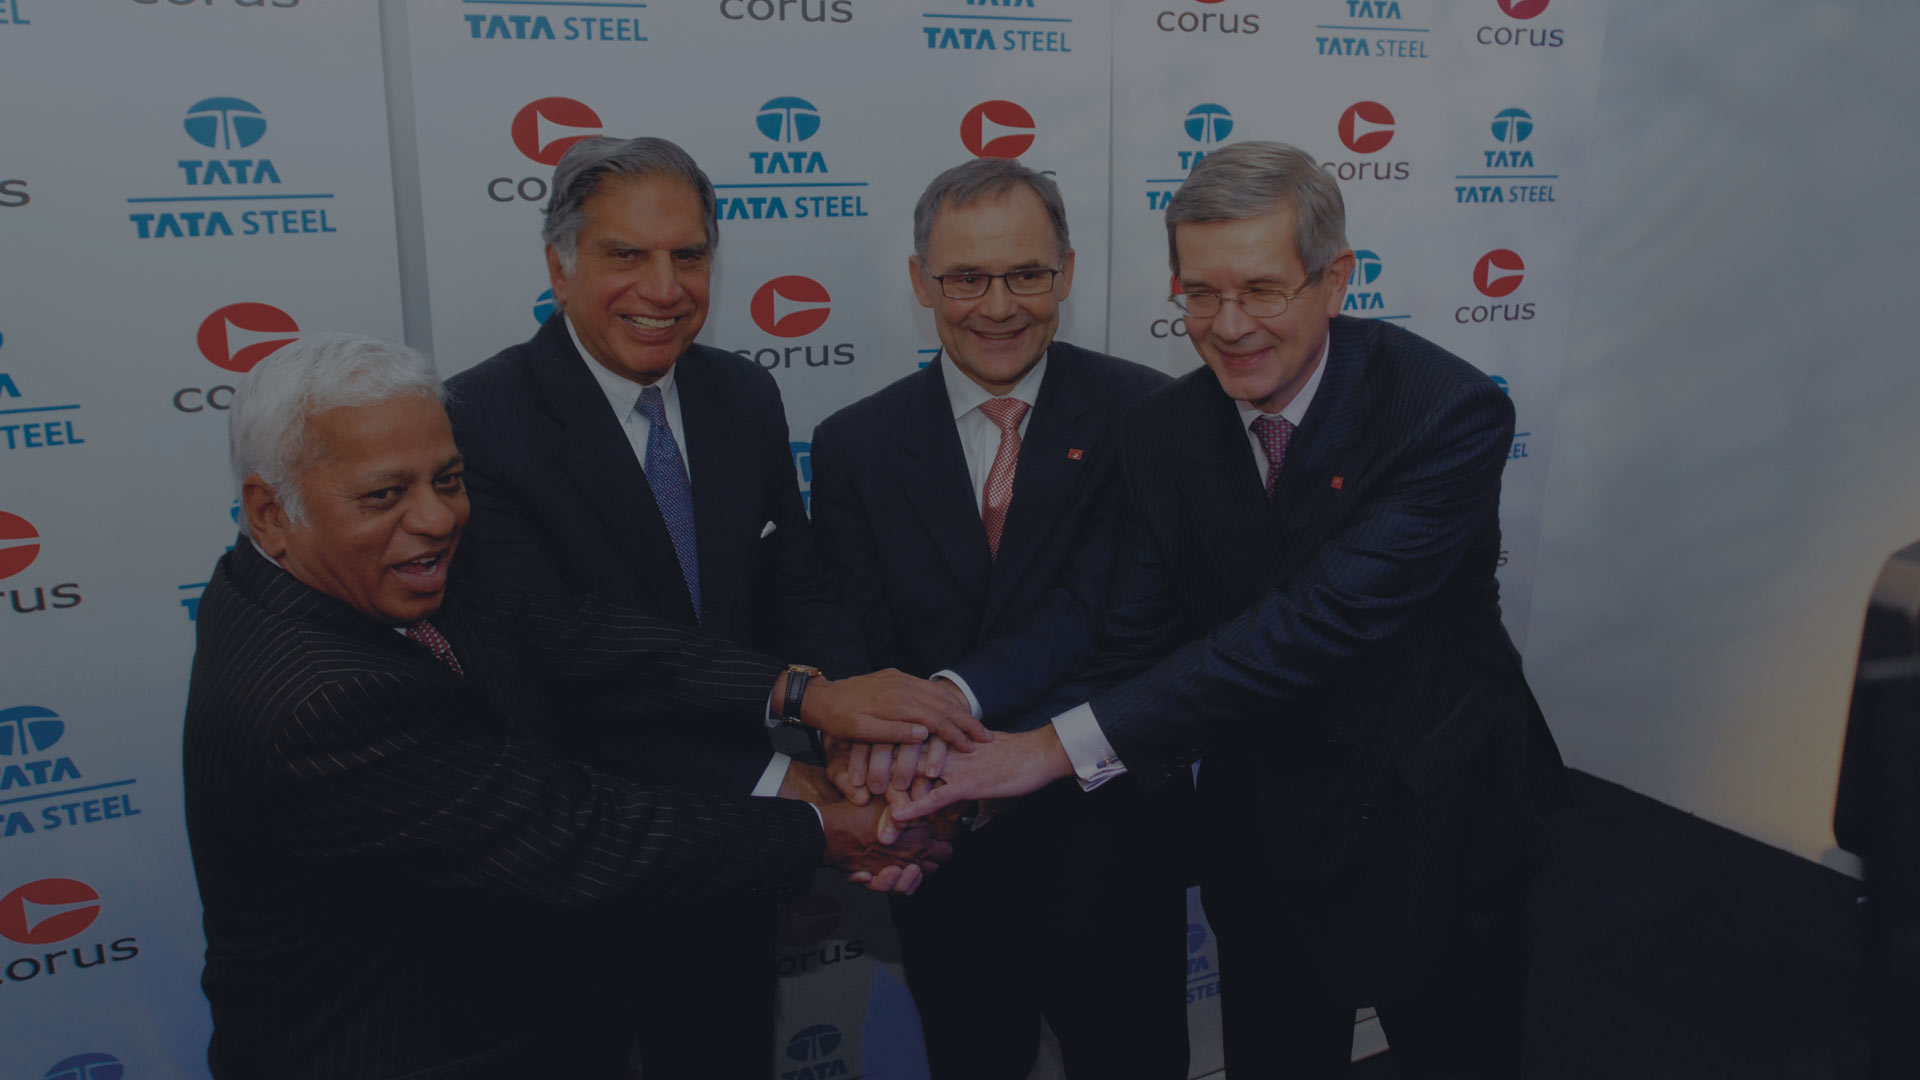 Tata Steel's acquisition of Corus made it a leading steel producer